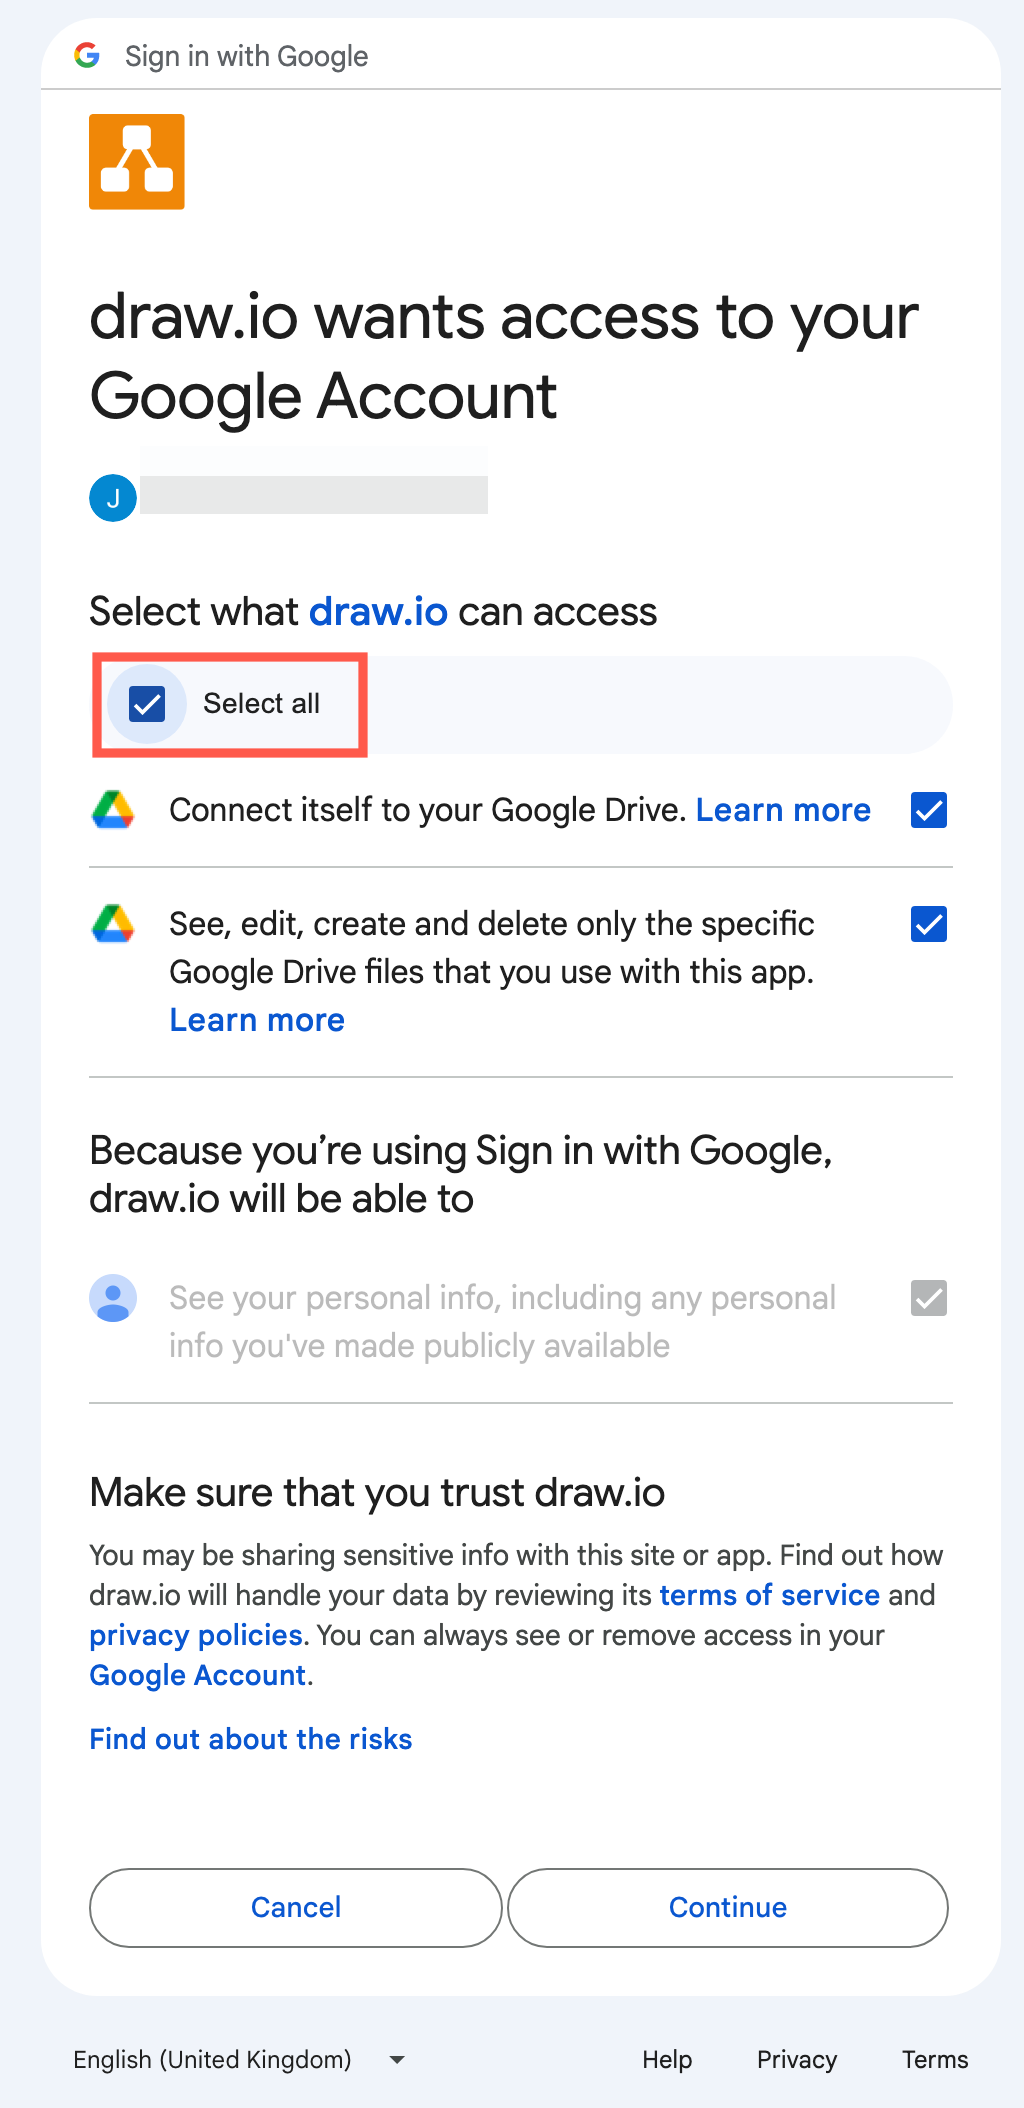 Grant permission for draw.io to access your Google Drive files and Google Docs